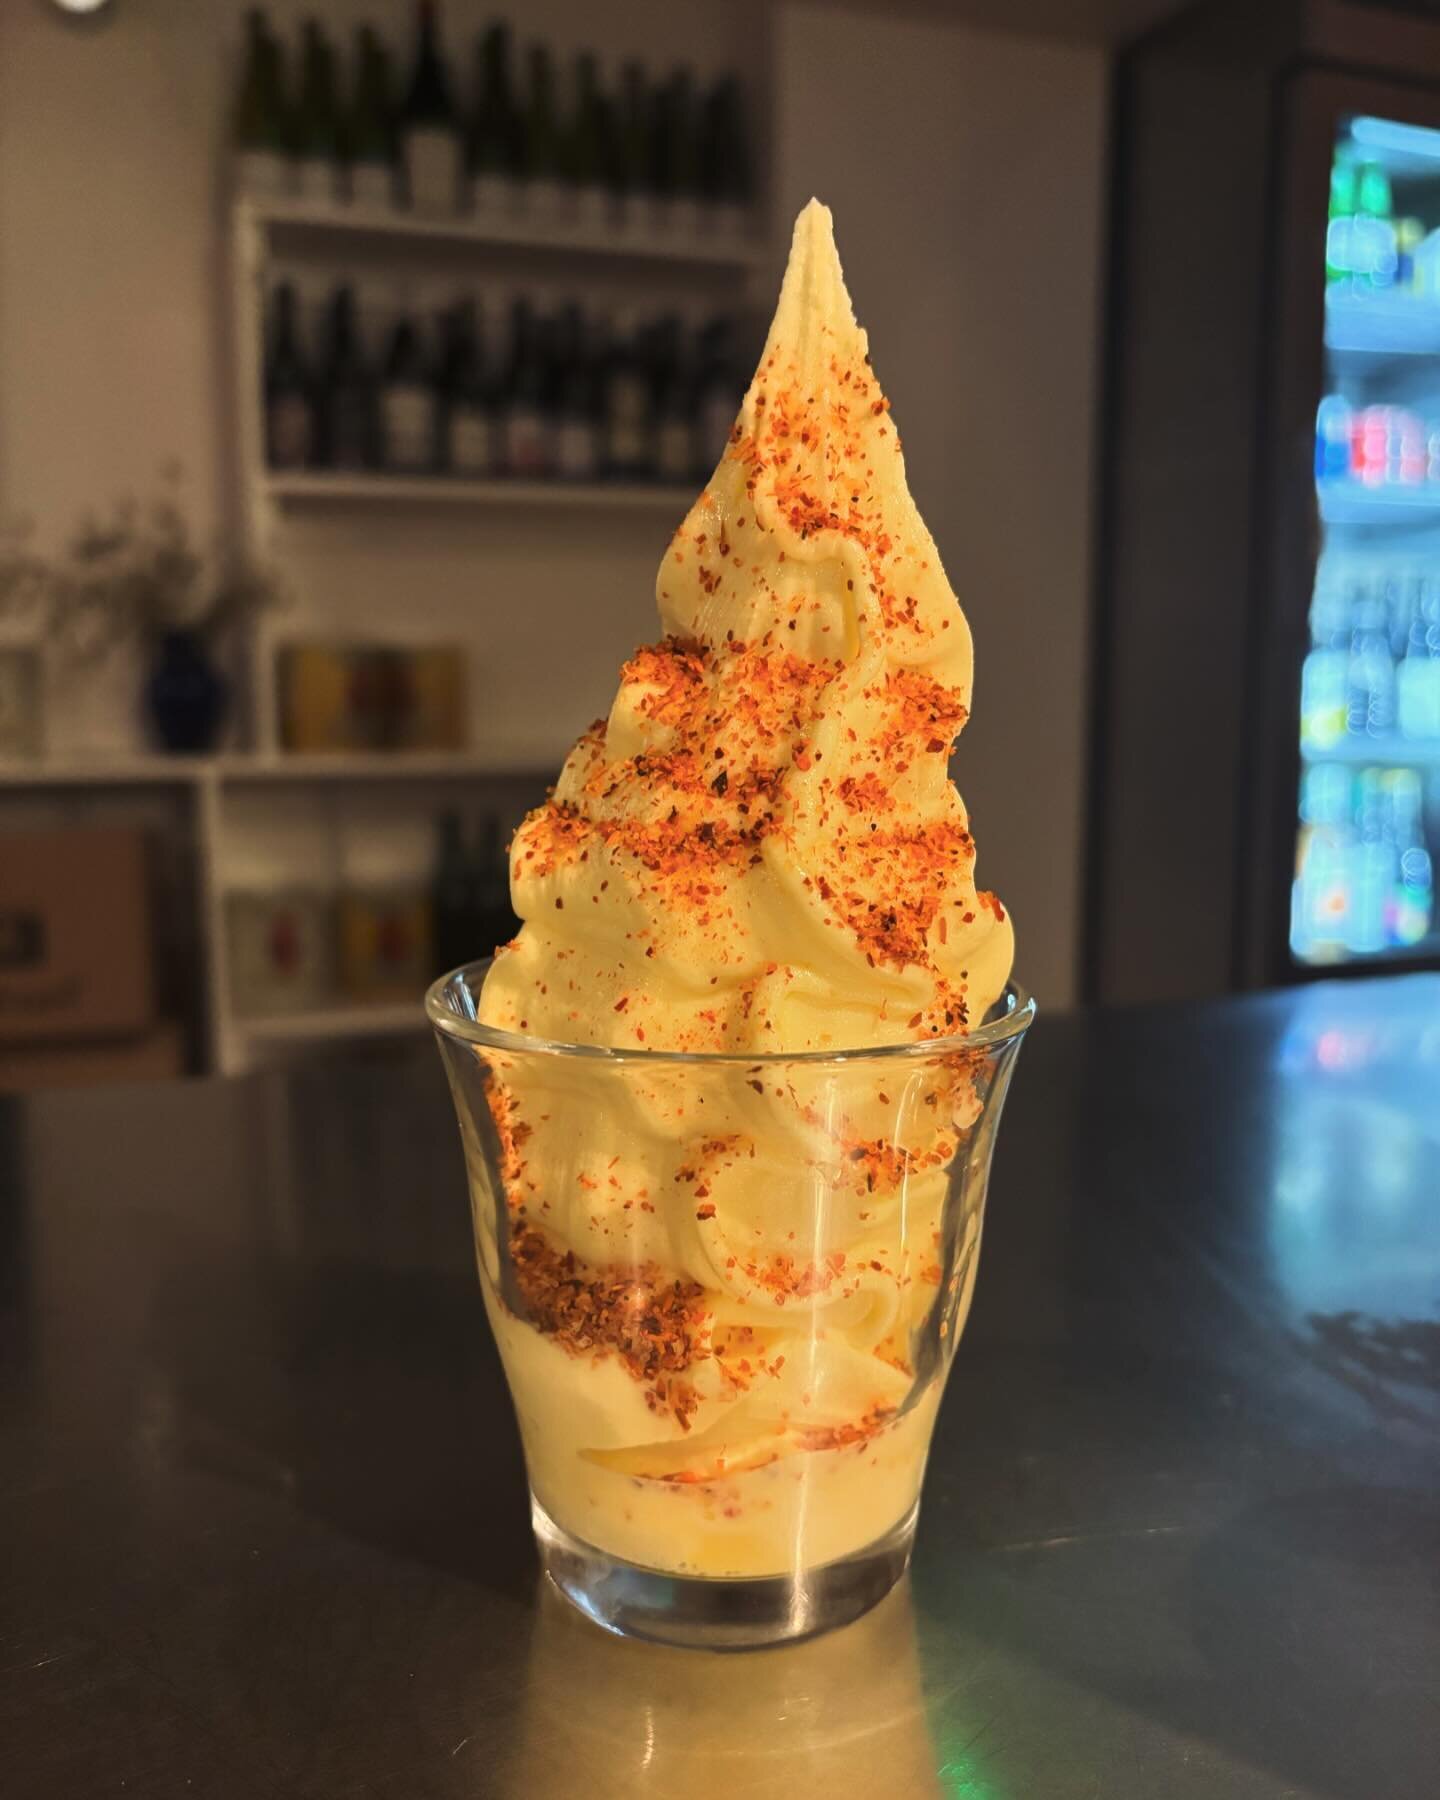 Pineapple dolewhip with tajin, and squeeze of lime. (Vegan)
Friday im in love!